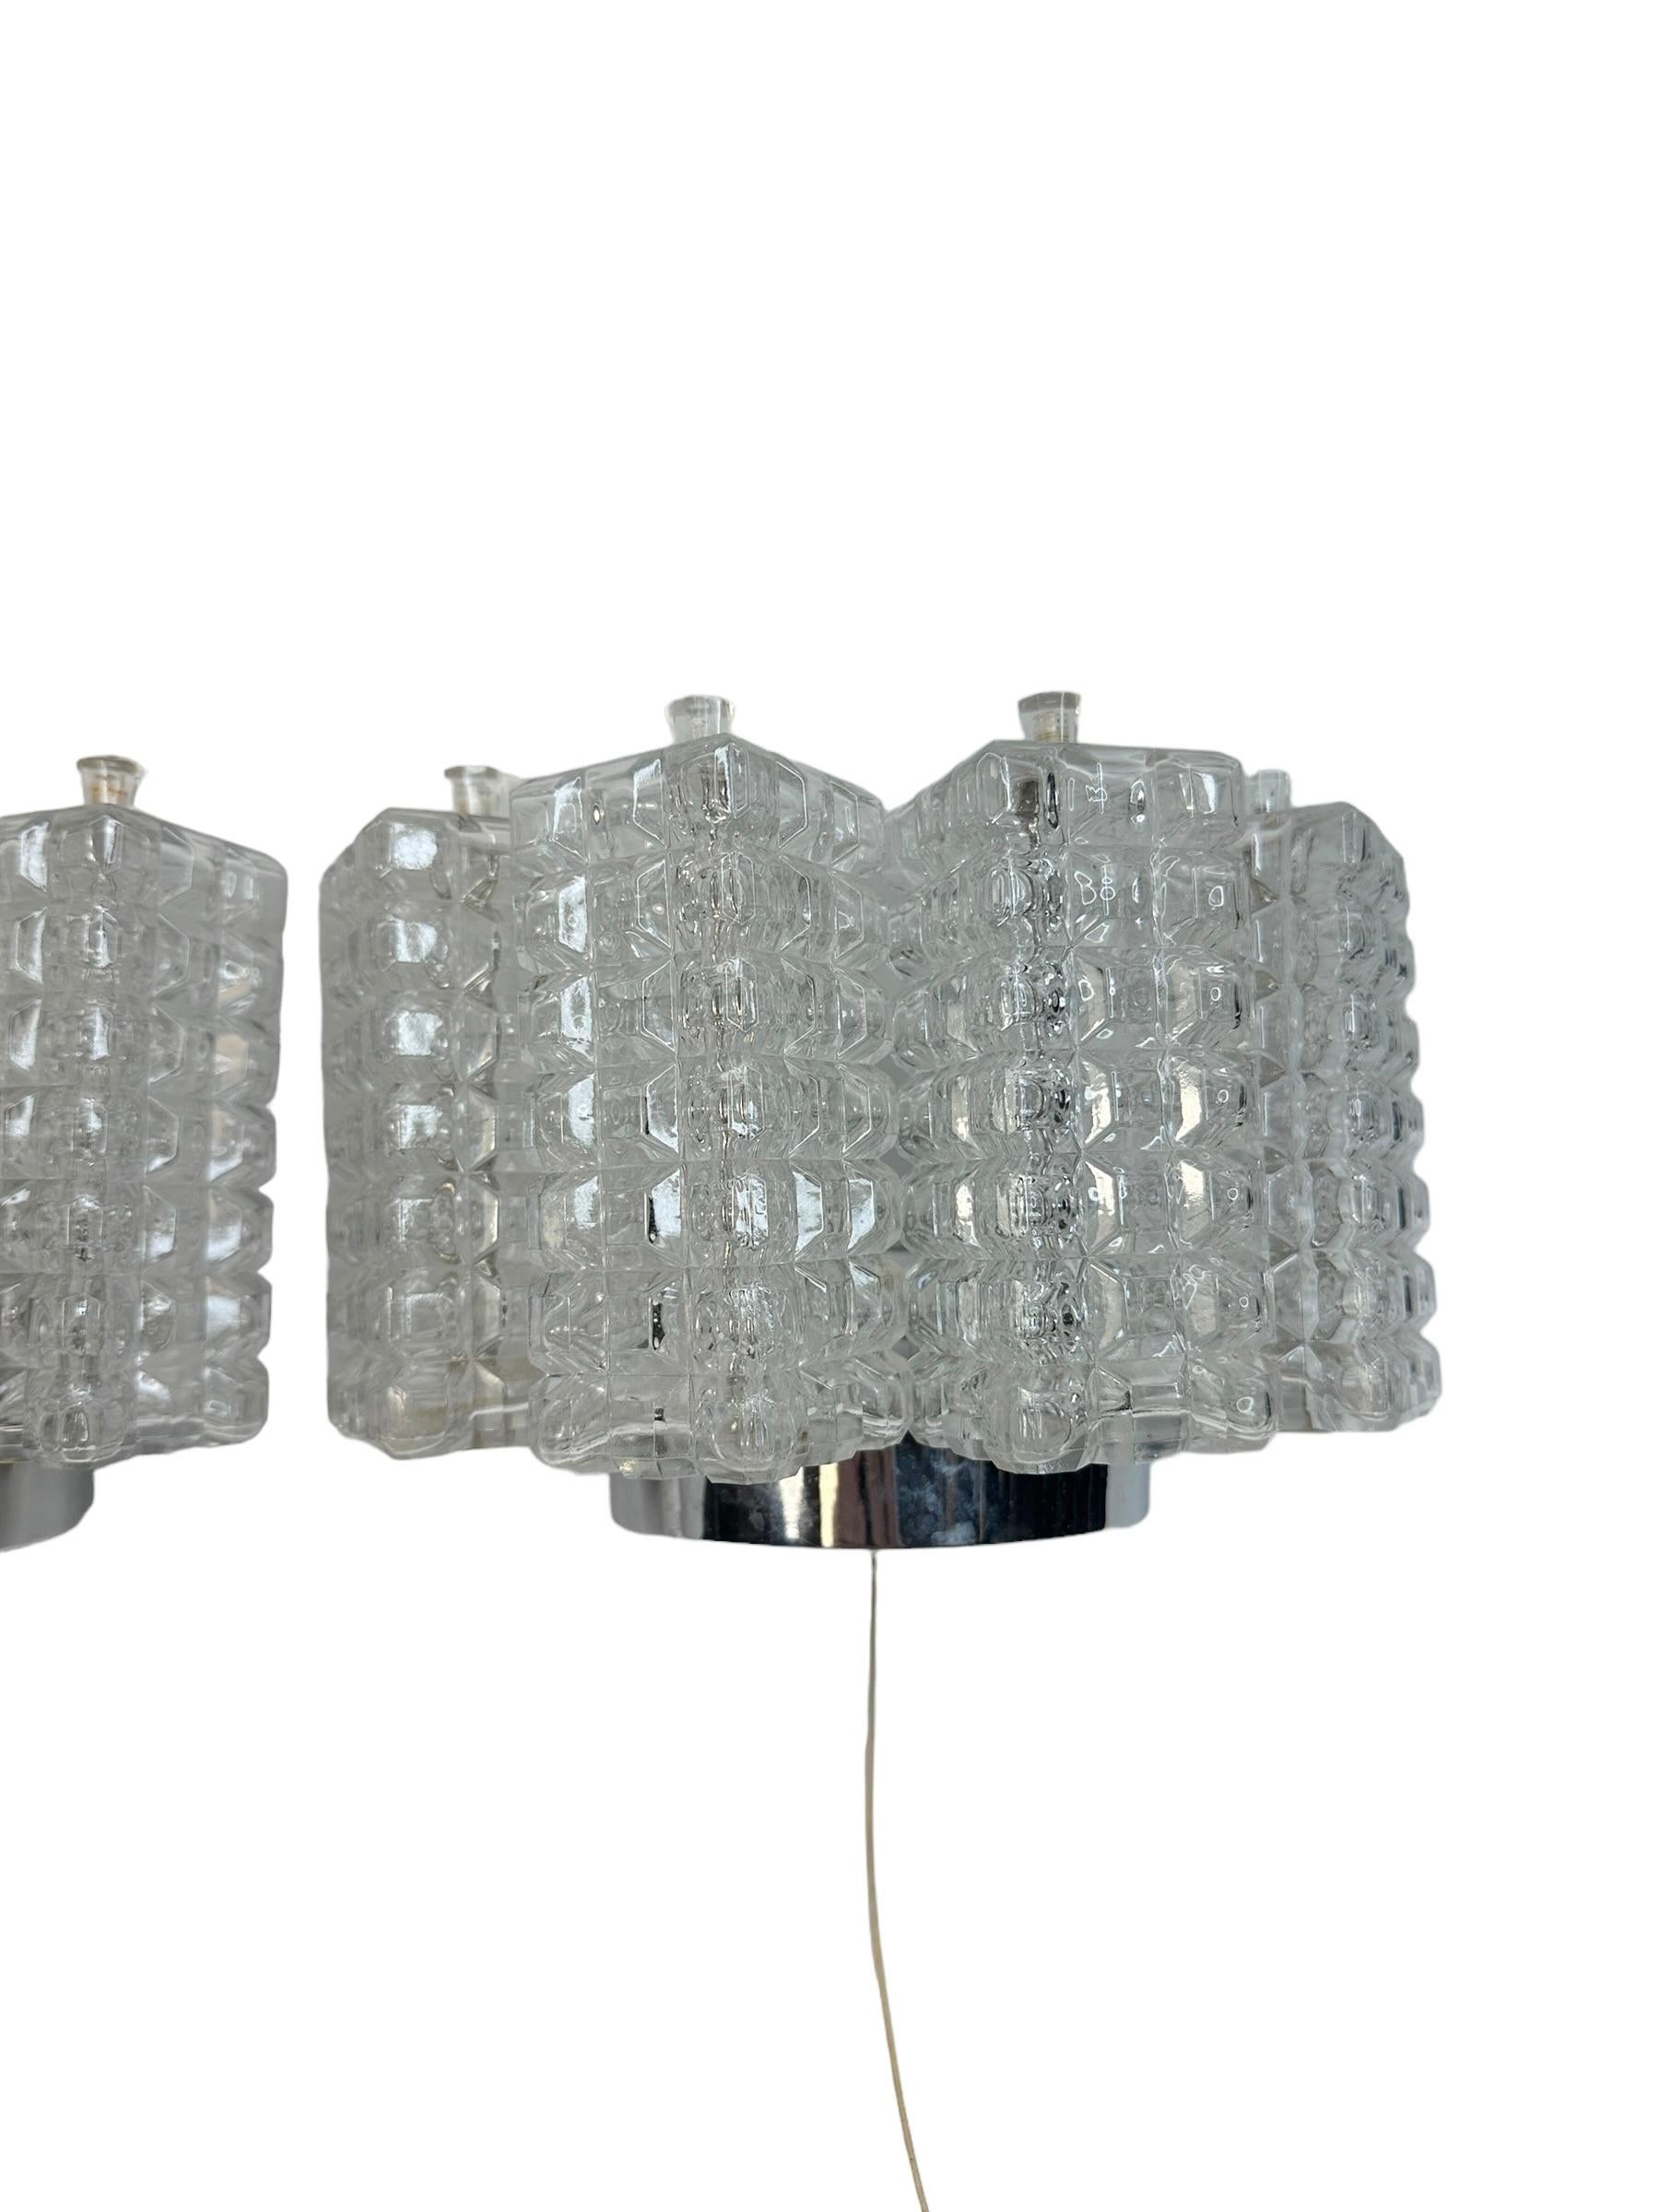 Industrial Pair of Glass Cube Sconces Wall Lights by Austrolux, Austria, 1960s For Sale